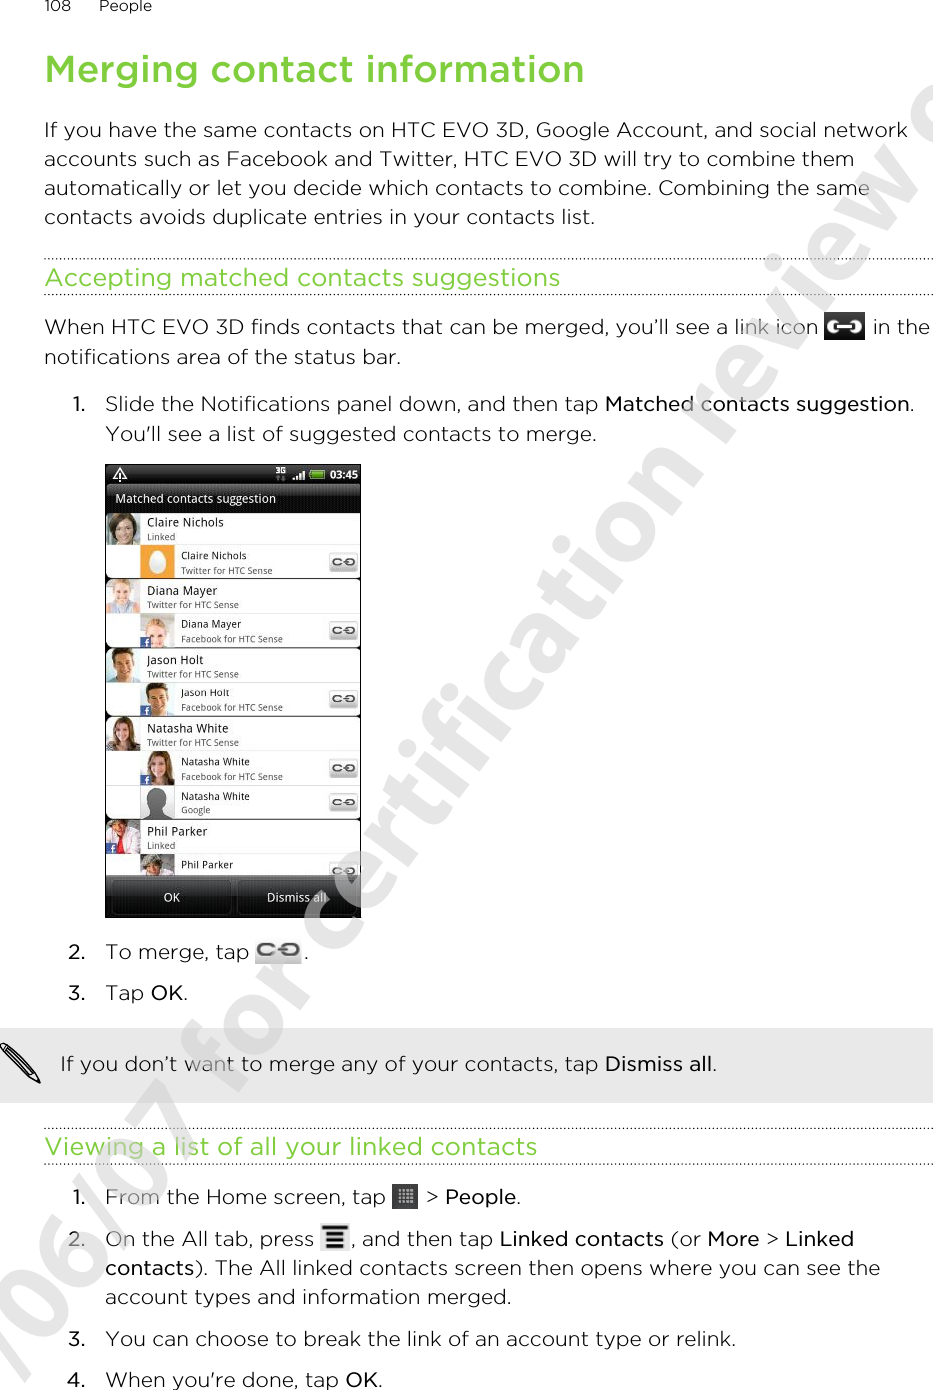 Merging contact informationIf you have the same contacts on HTC EVO 3D, Google Account, and social networkaccounts such as Facebook and Twitter, HTC EVO 3D will try to combine themautomatically or let you decide which contacts to combine. Combining the samecontacts avoids duplicate entries in your contacts list.Accepting matched contacts suggestionsWhen HTC EVO 3D finds contacts that can be merged, you’ll see a link icon   in thenotifications area of the status bar.1. Slide the Notifications panel down, and then tap Matched contacts suggestion.You&apos;ll see a list of suggested contacts to merge.2. To merge, tap  .3. Tap OK.If you don’t want to merge any of your contacts, tap Dismiss all.Viewing a list of all your linked contacts1. From the Home screen, tap   &gt; People.2. On the All tab, press  , and then tap Linked contacts (or More &gt; Linkedcontacts). The All linked contacts screen then opens where you can see theaccount types and information merged.3. You can choose to break the link of an account type or relink.4. When you&apos;re done, tap OK.108 People2011/06/07 for certification review only